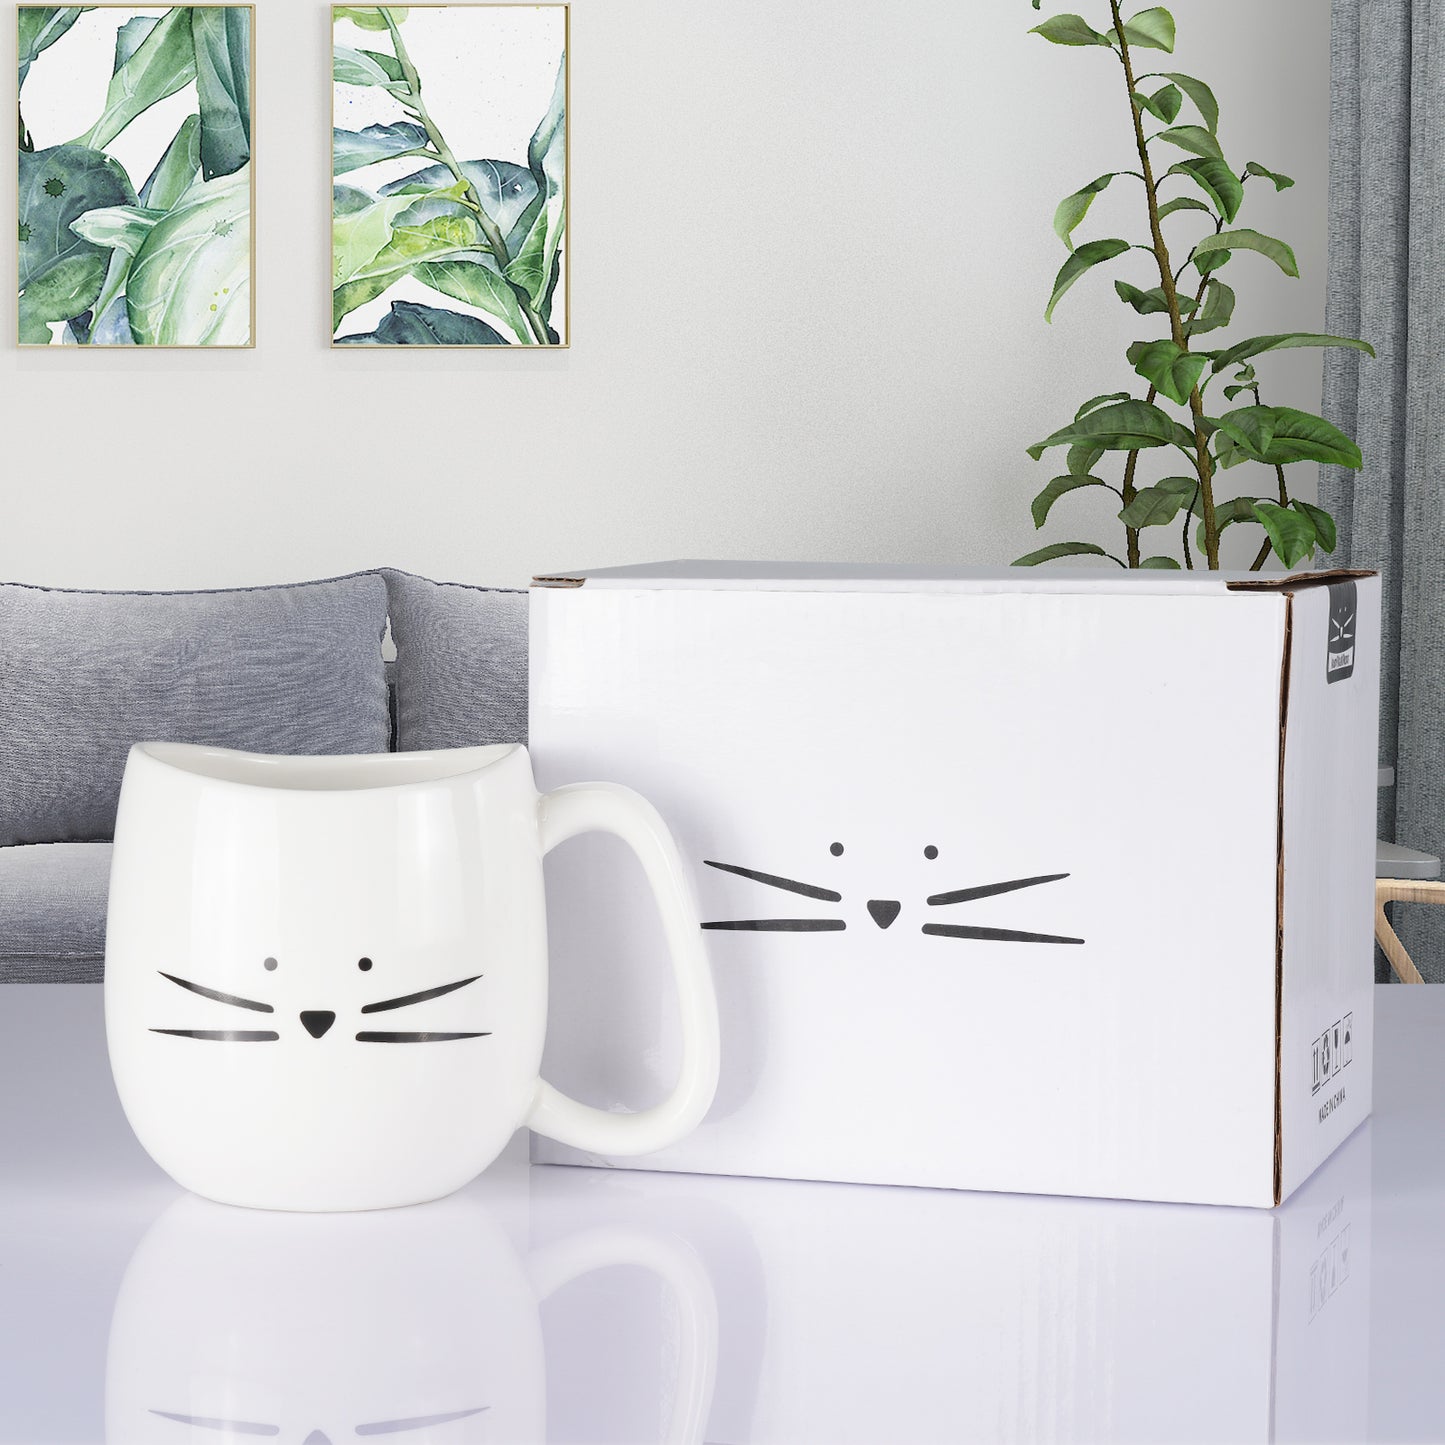 Cute Cat Cups Coffee Glass Mugs Cat Gifts for Cat Lovers Women